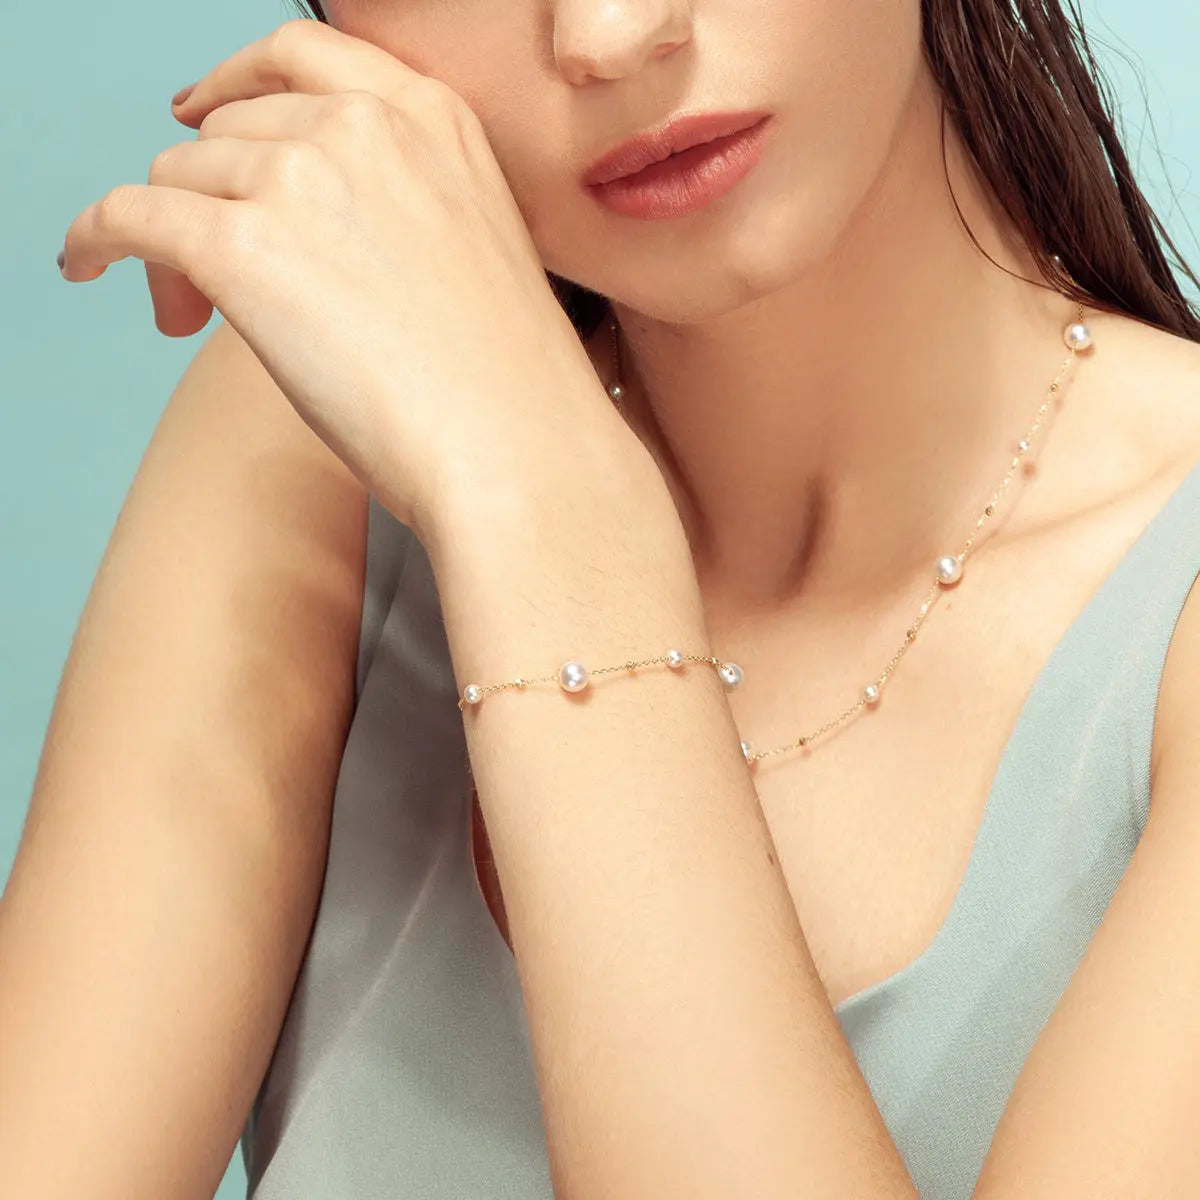 STAR TRAILS COLLECTION Akoya Pearl 18K Gold Baby's Breath Bracelet